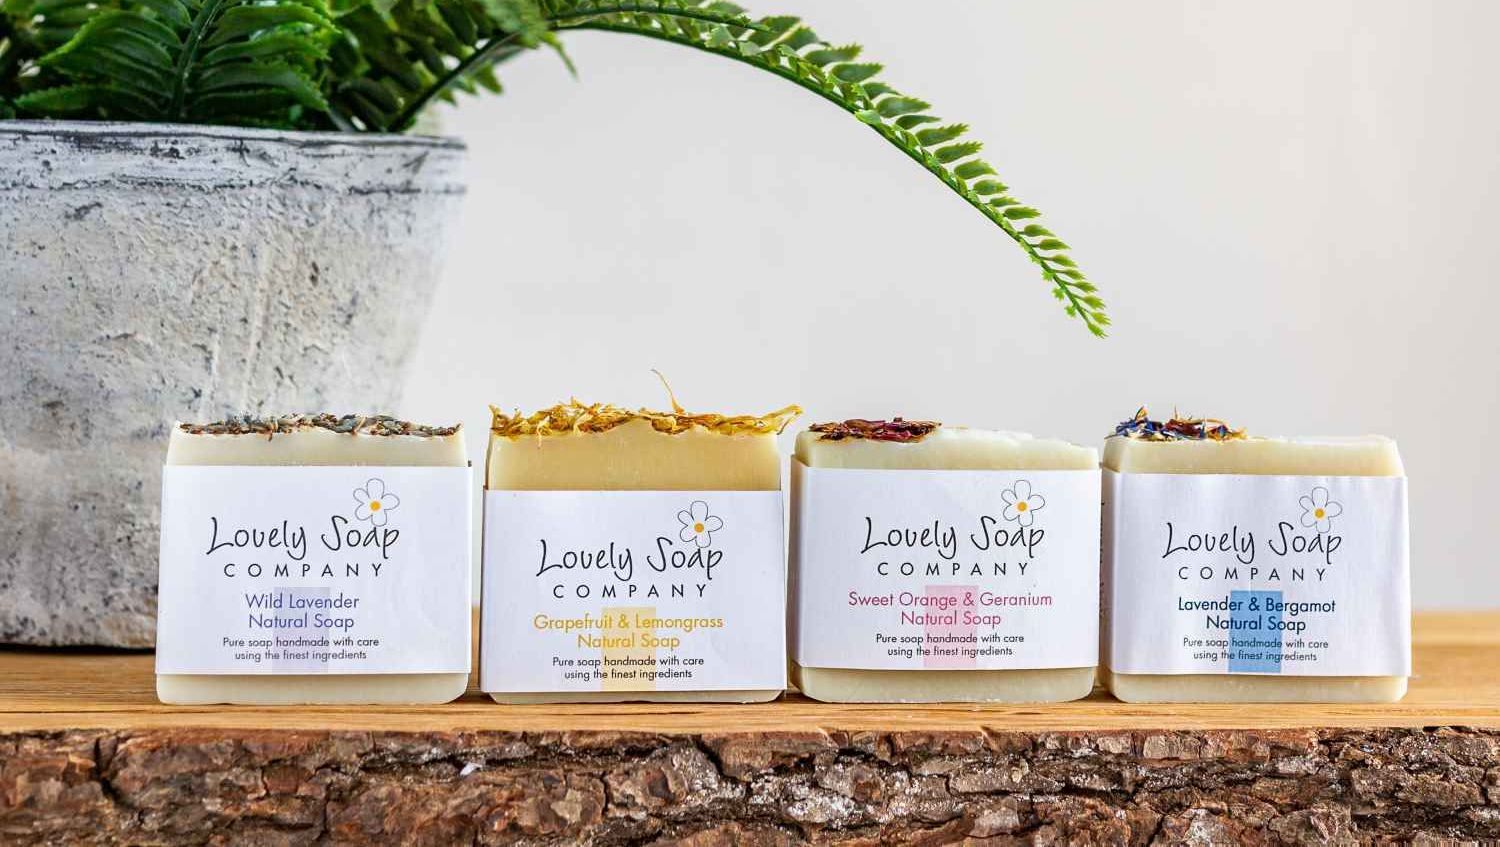 Lovely Soap Company handmade natural soaps and personalised pamper gifts